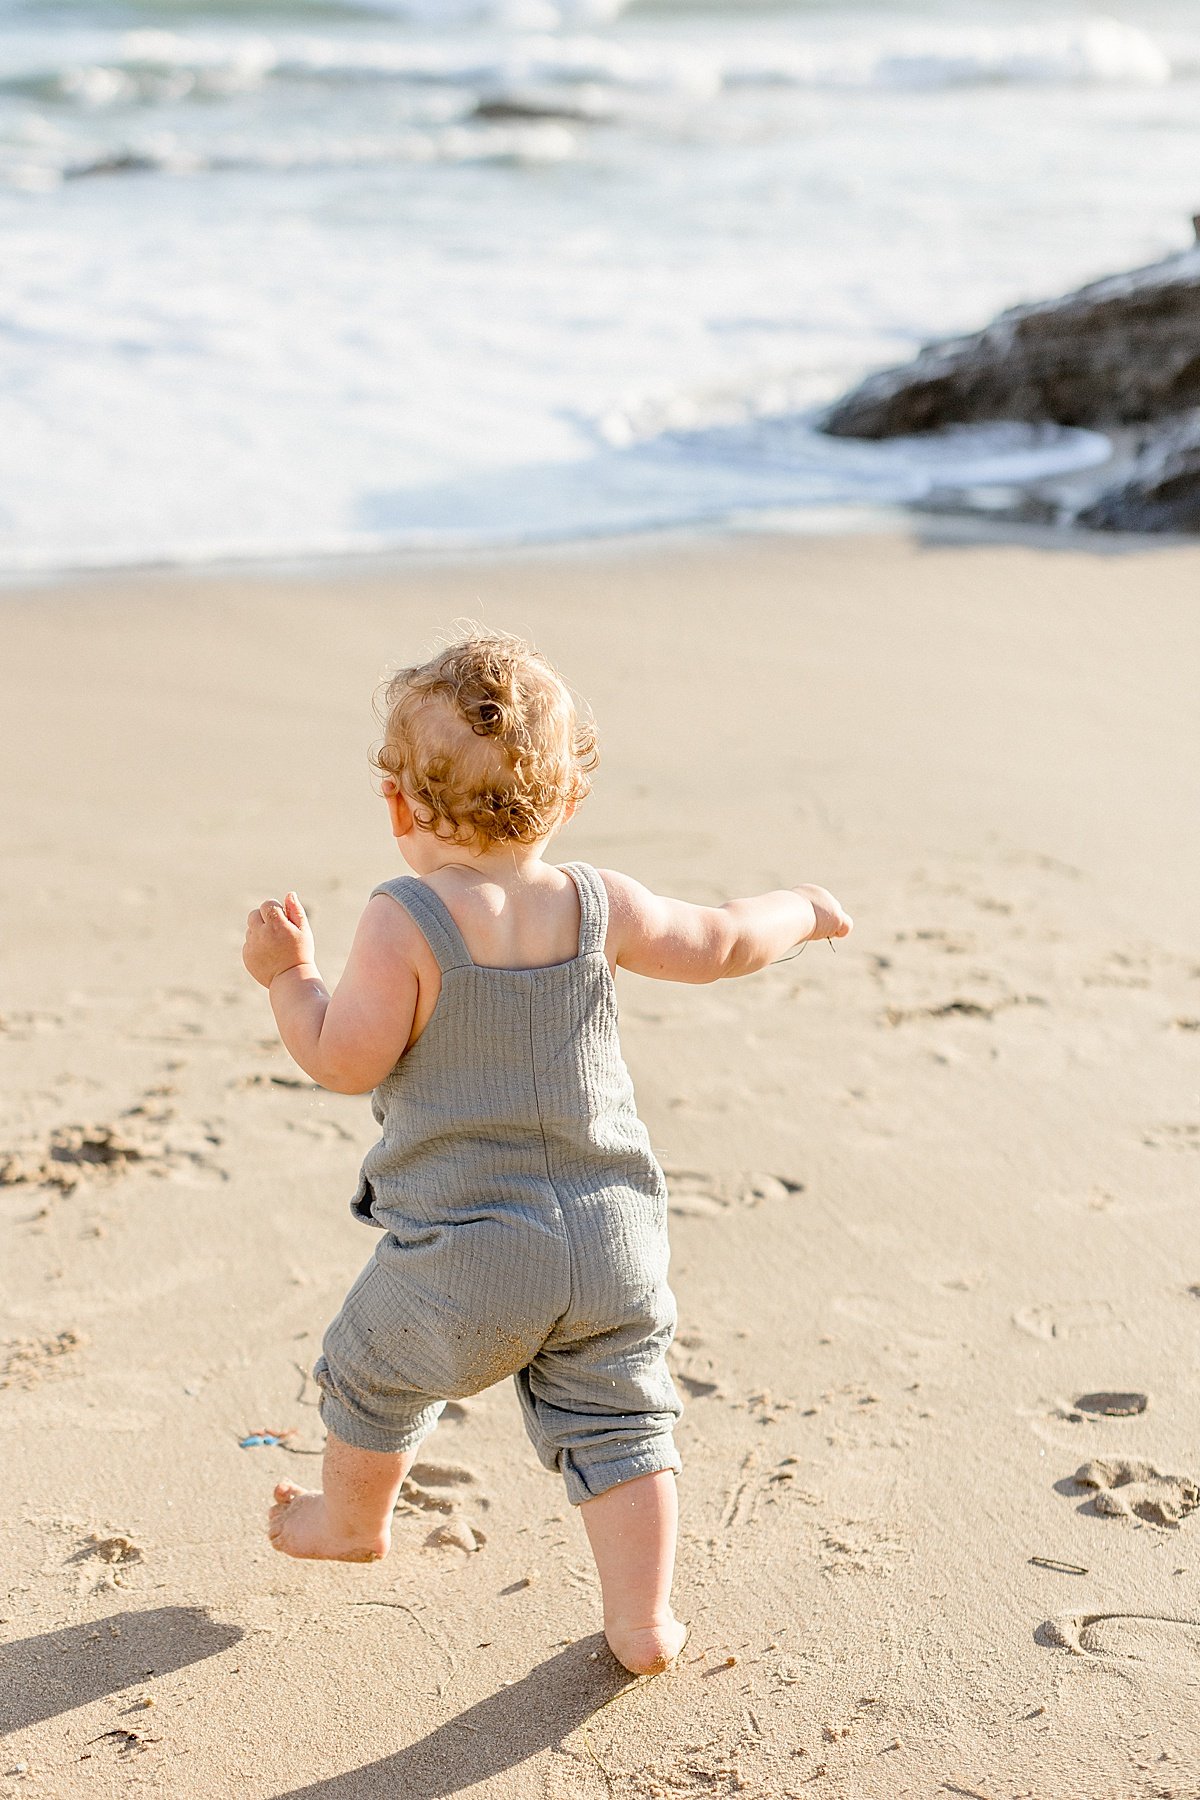 Candid portrait of happy baby boy in overalls running on beach during sunset | Ambre Williams Photography in Newport Beach, California